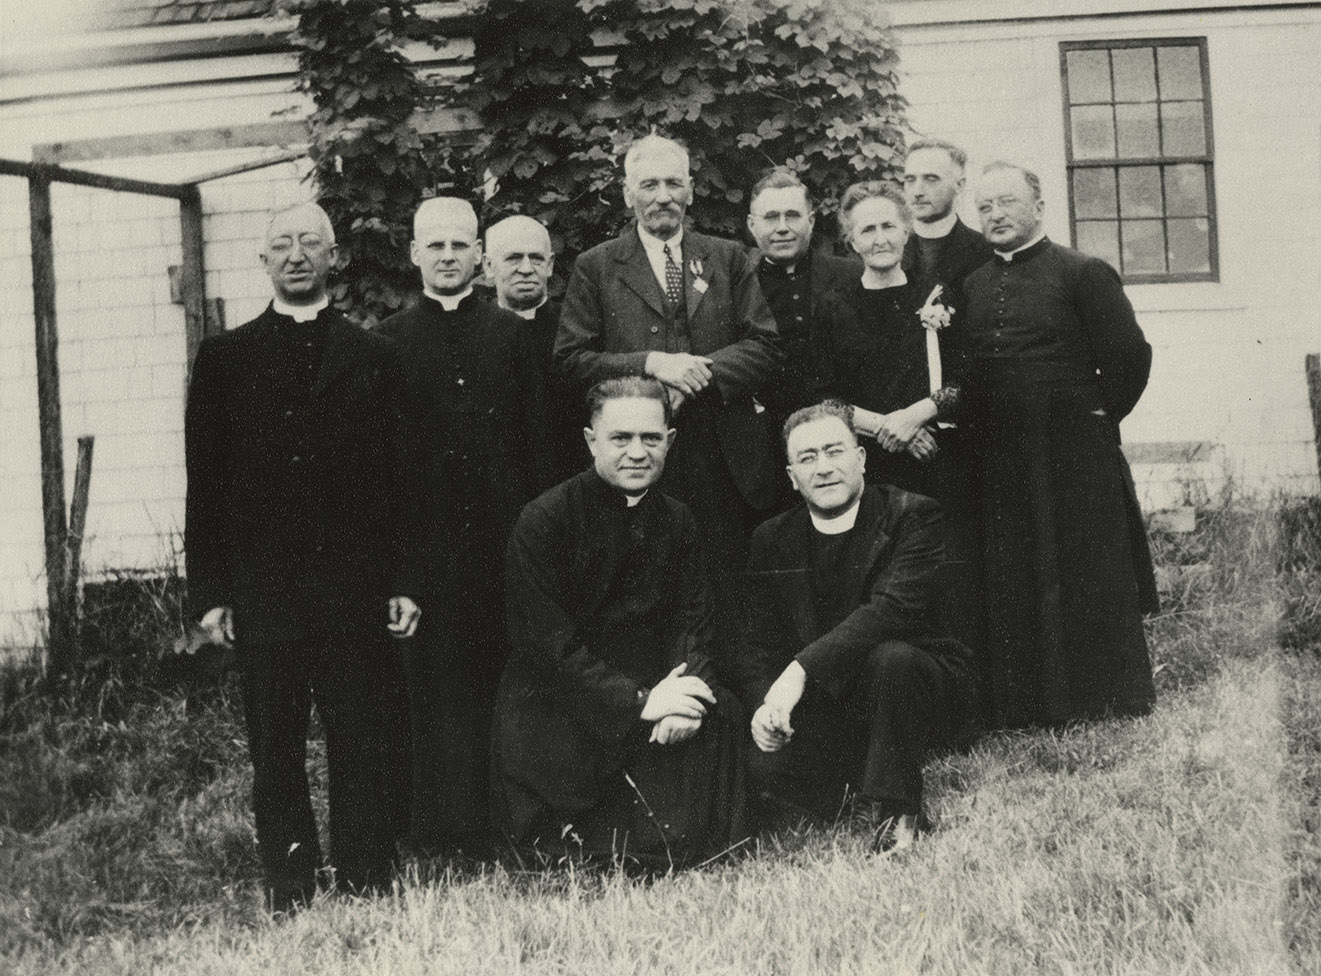 communityalbums - Léo and Marguerite Melanson and priests from College Sainte-Anne